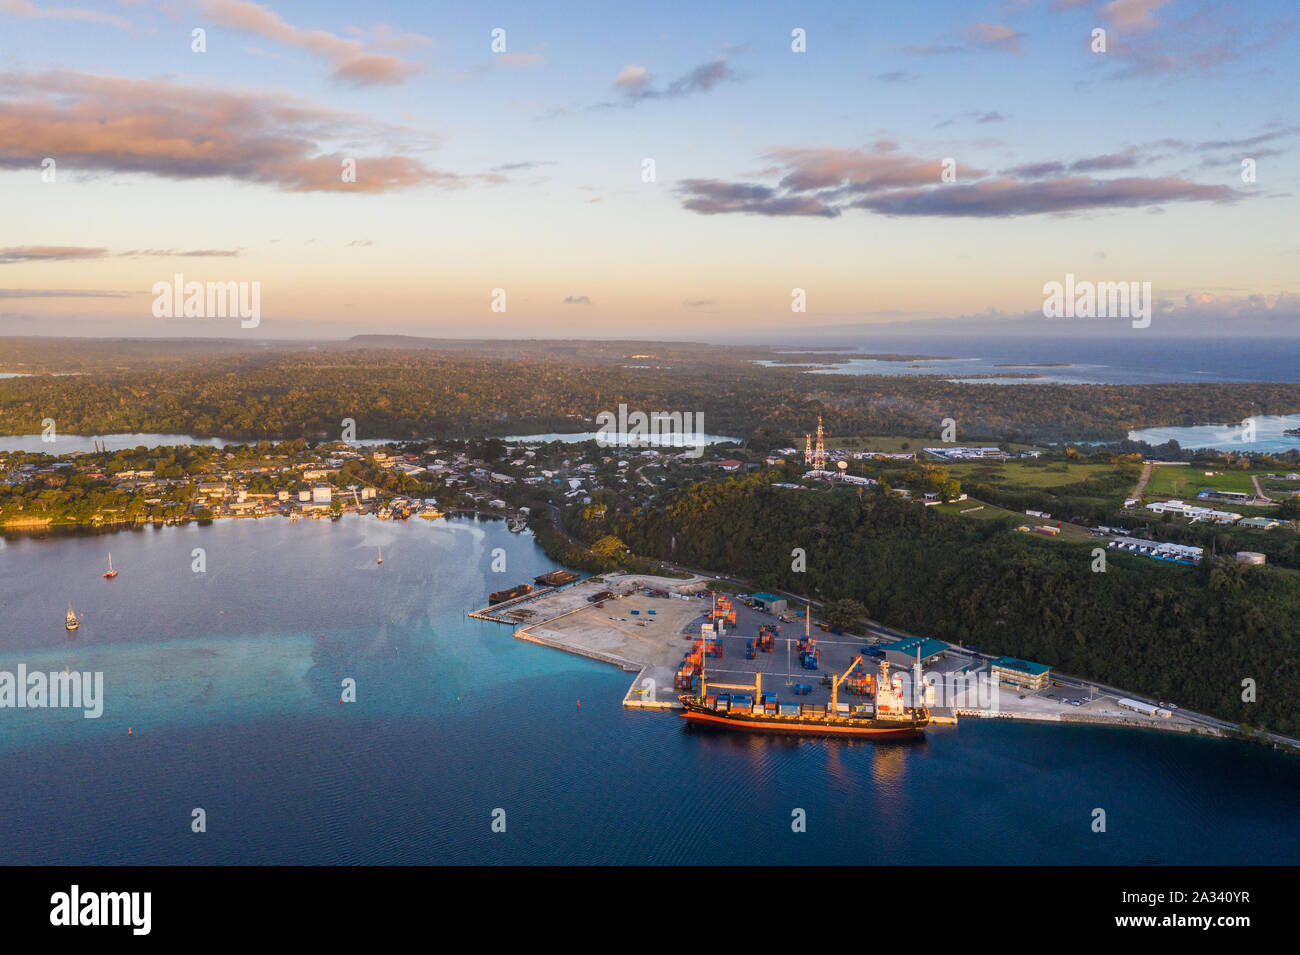 Aerial view of a container ship loading cargo in the commercial dock of Port Vila, Vanuatu capital city in the south Pacific at sunset Stock Photo